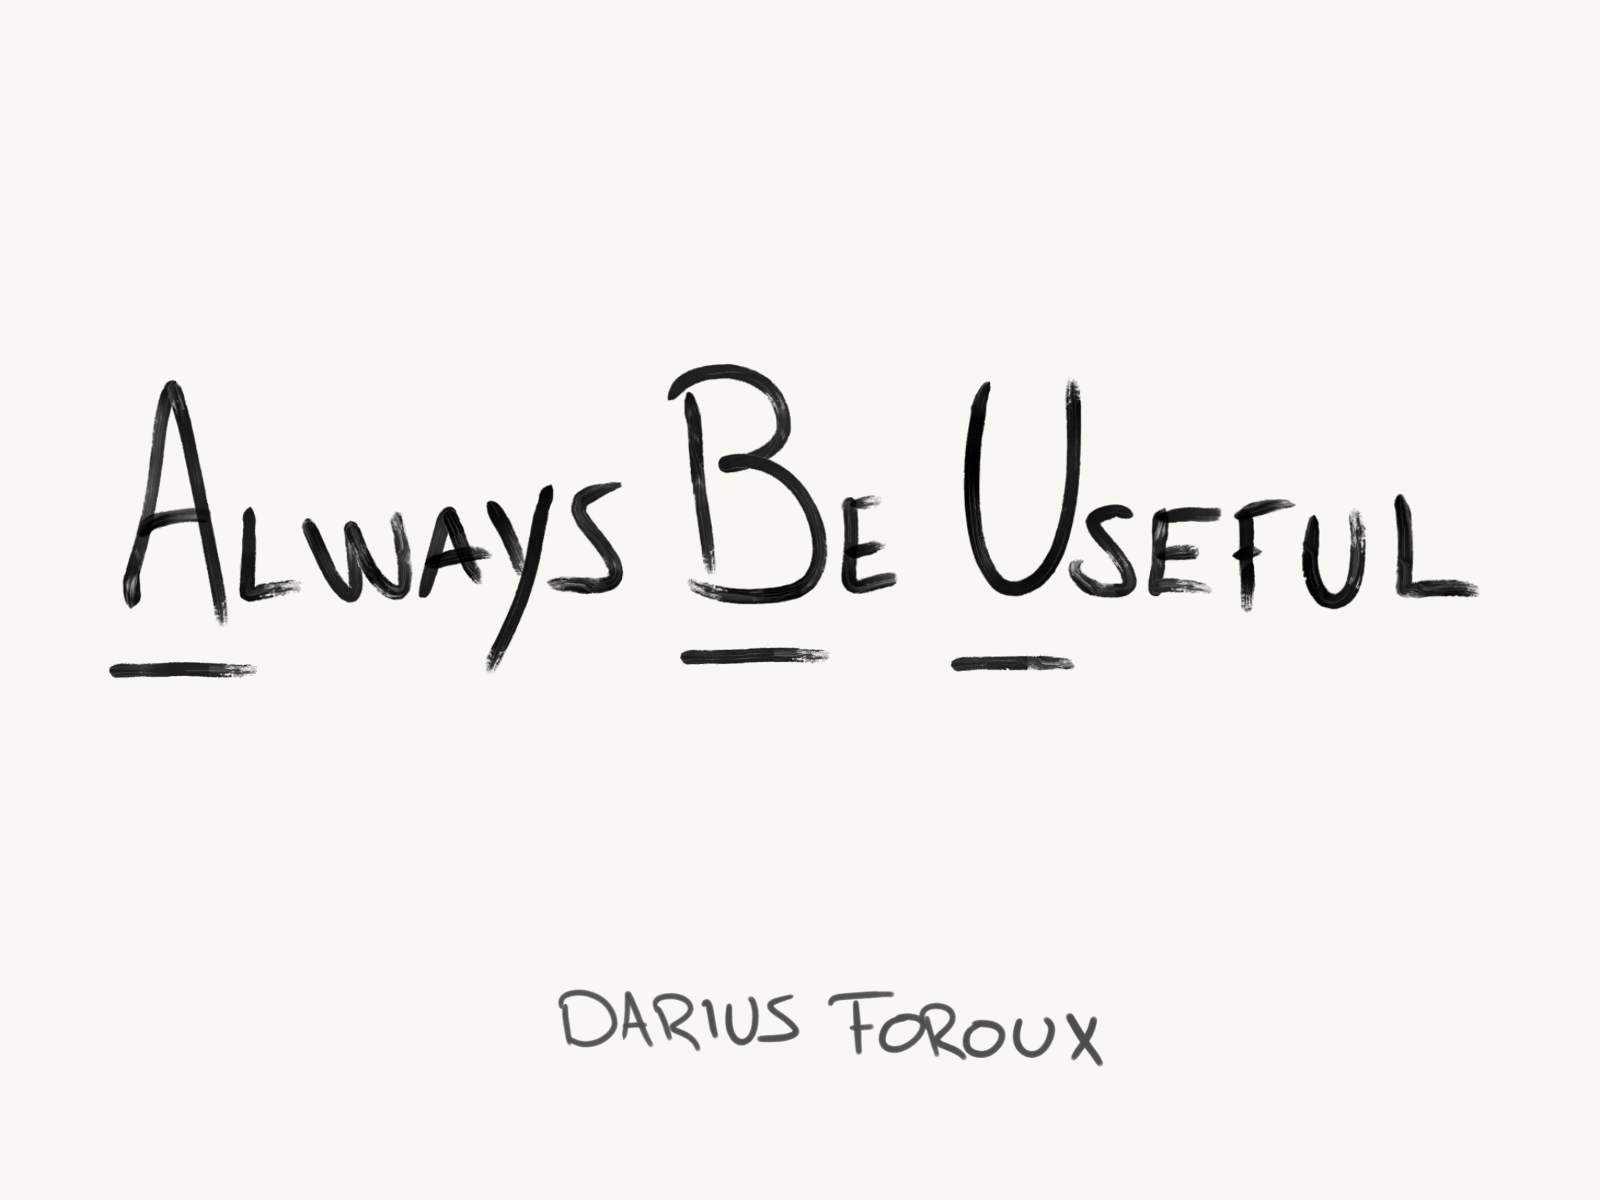 The Purpose Of Life Is Not Happiness: It's Usefulness | by Darius Foroux |  The Blog Of Darius Foroux | Medium